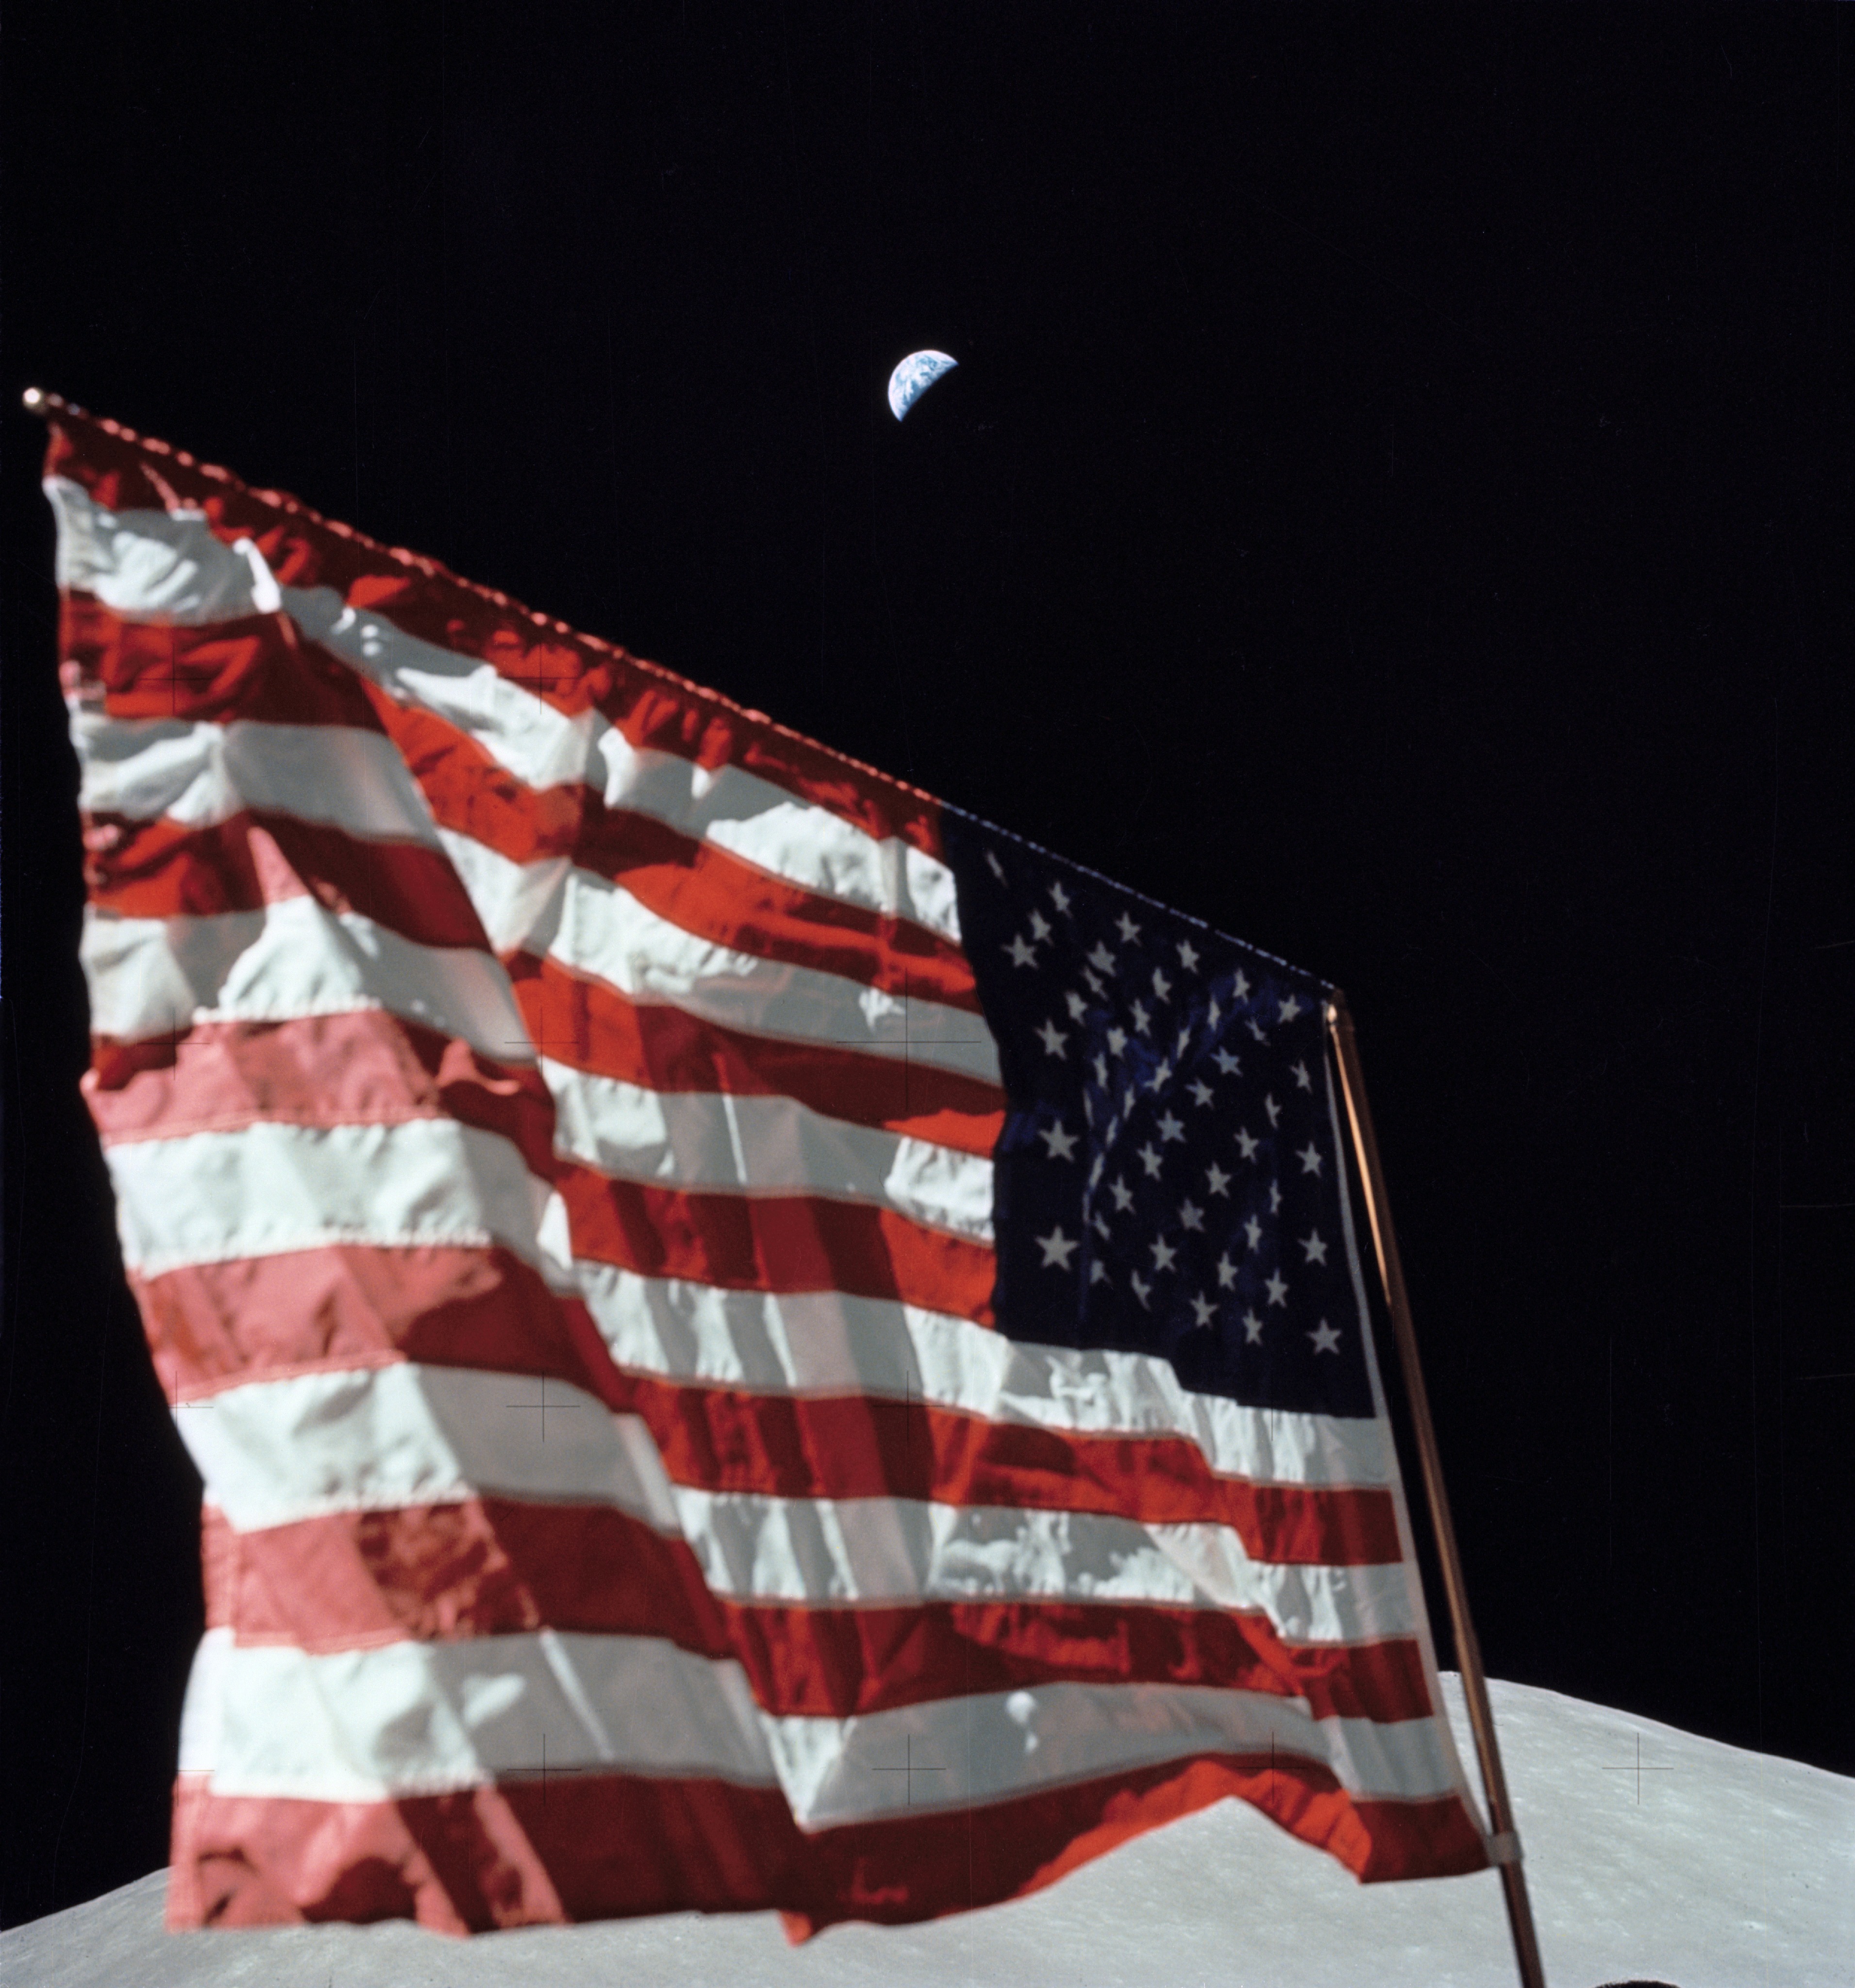  A close-up view of the U.S. flag deployed on the moon at the Taurus-Littrow landing site by the crewmen of the Apollo 17 